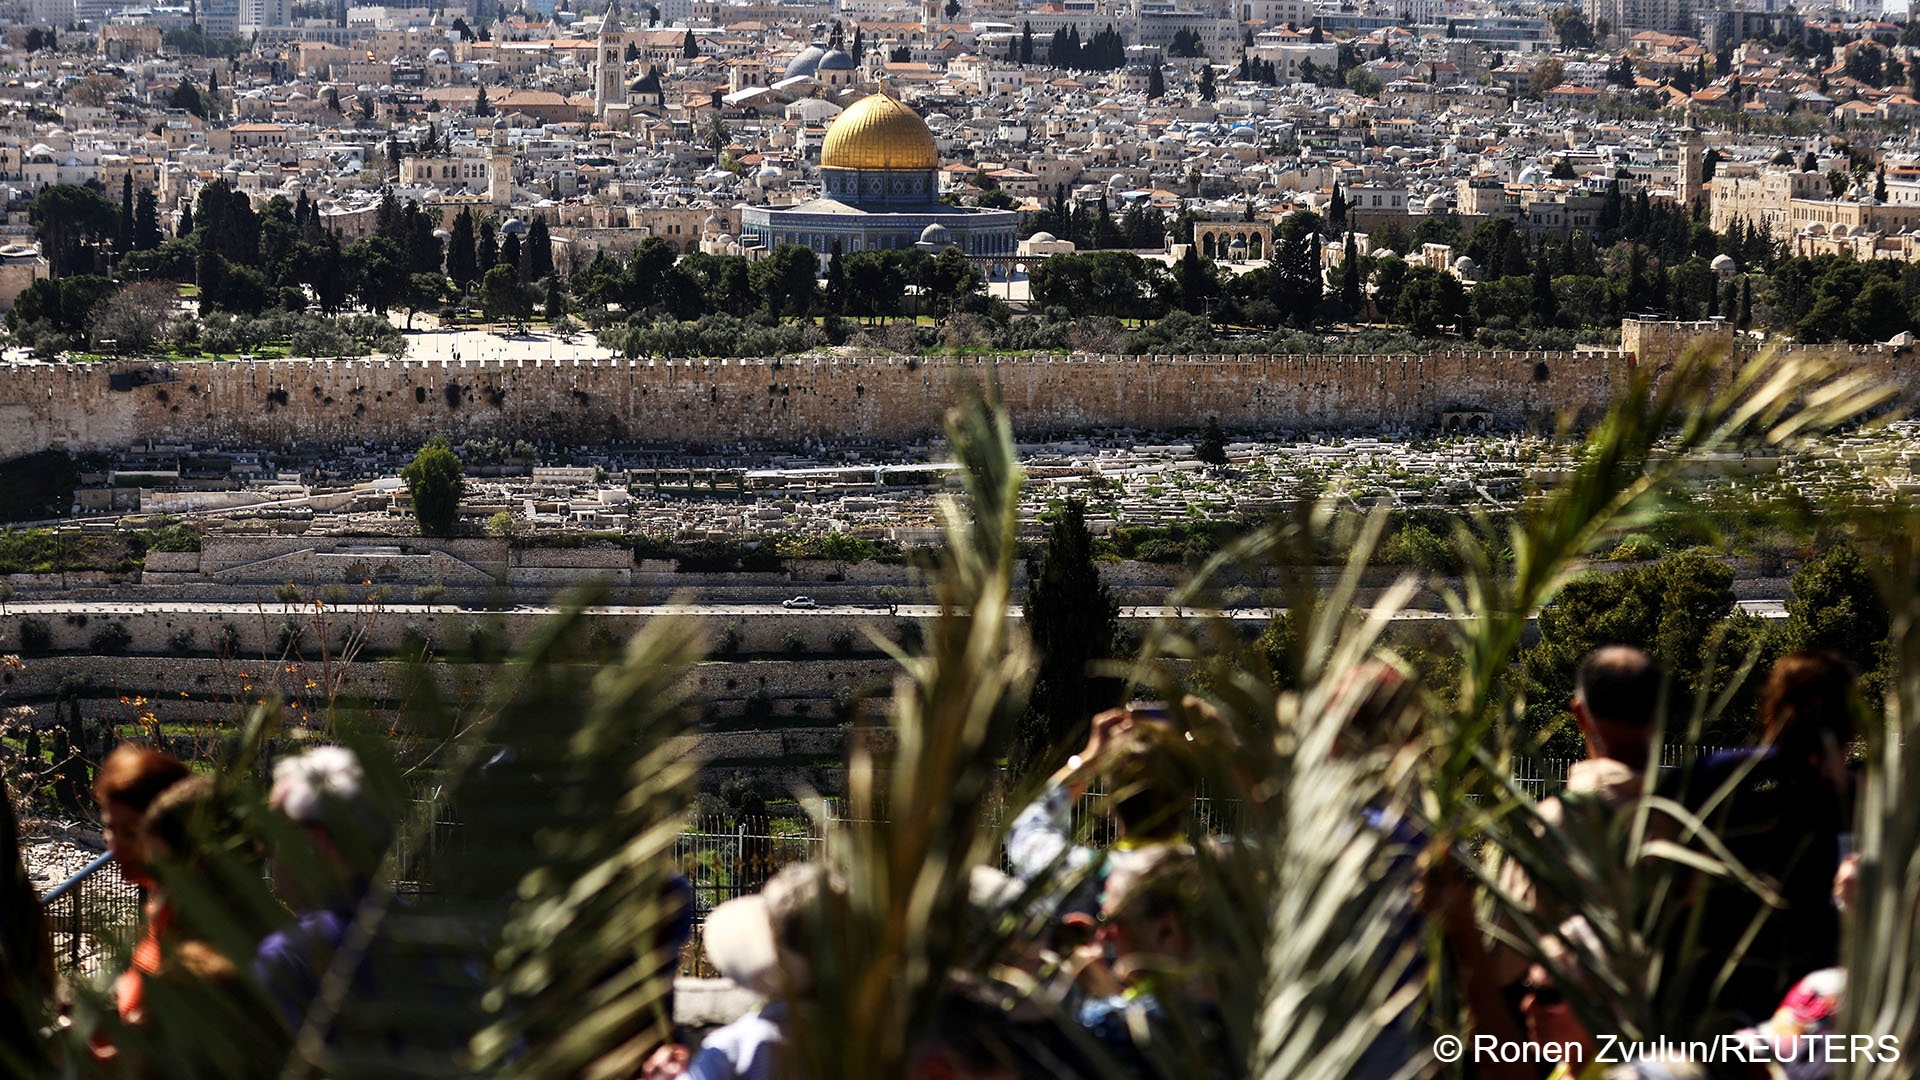 The Dome of the Rock is seen in the background as Christian worshippers attend a Palm Sunday procession on the Mount of Olives in Jerusalem, 2 April 2023 (image: REUTERS/Ronen Zvulun) 